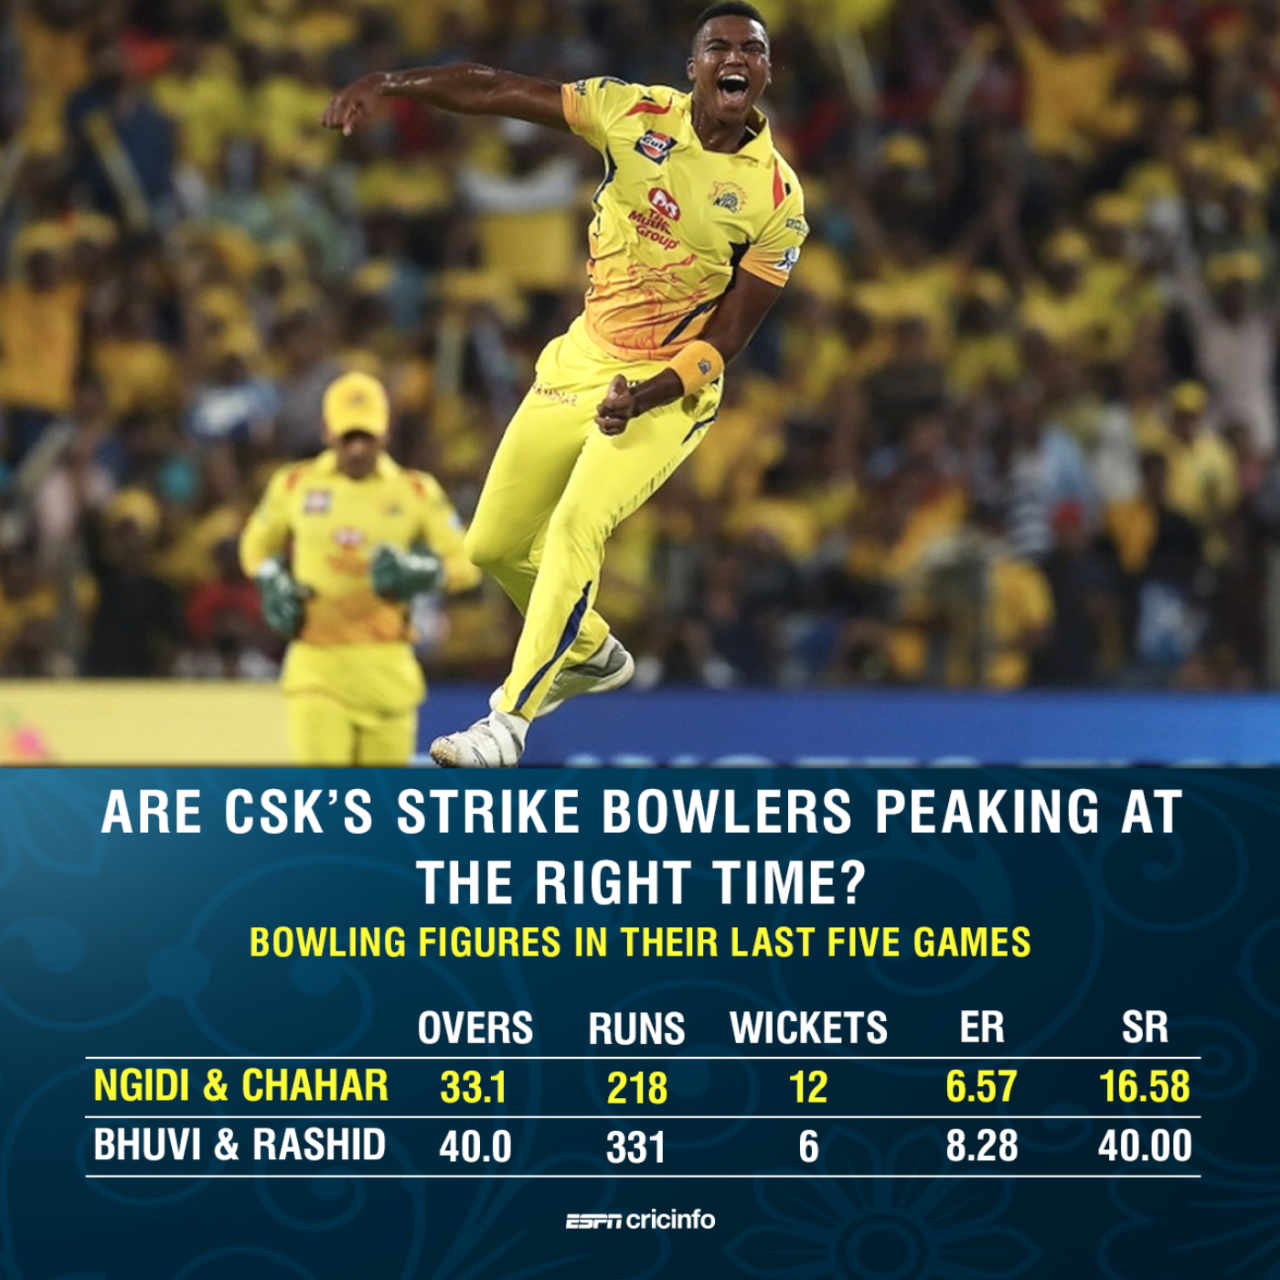 Are CSK's strike bowlers peaking at the right time?, May 22, 2018